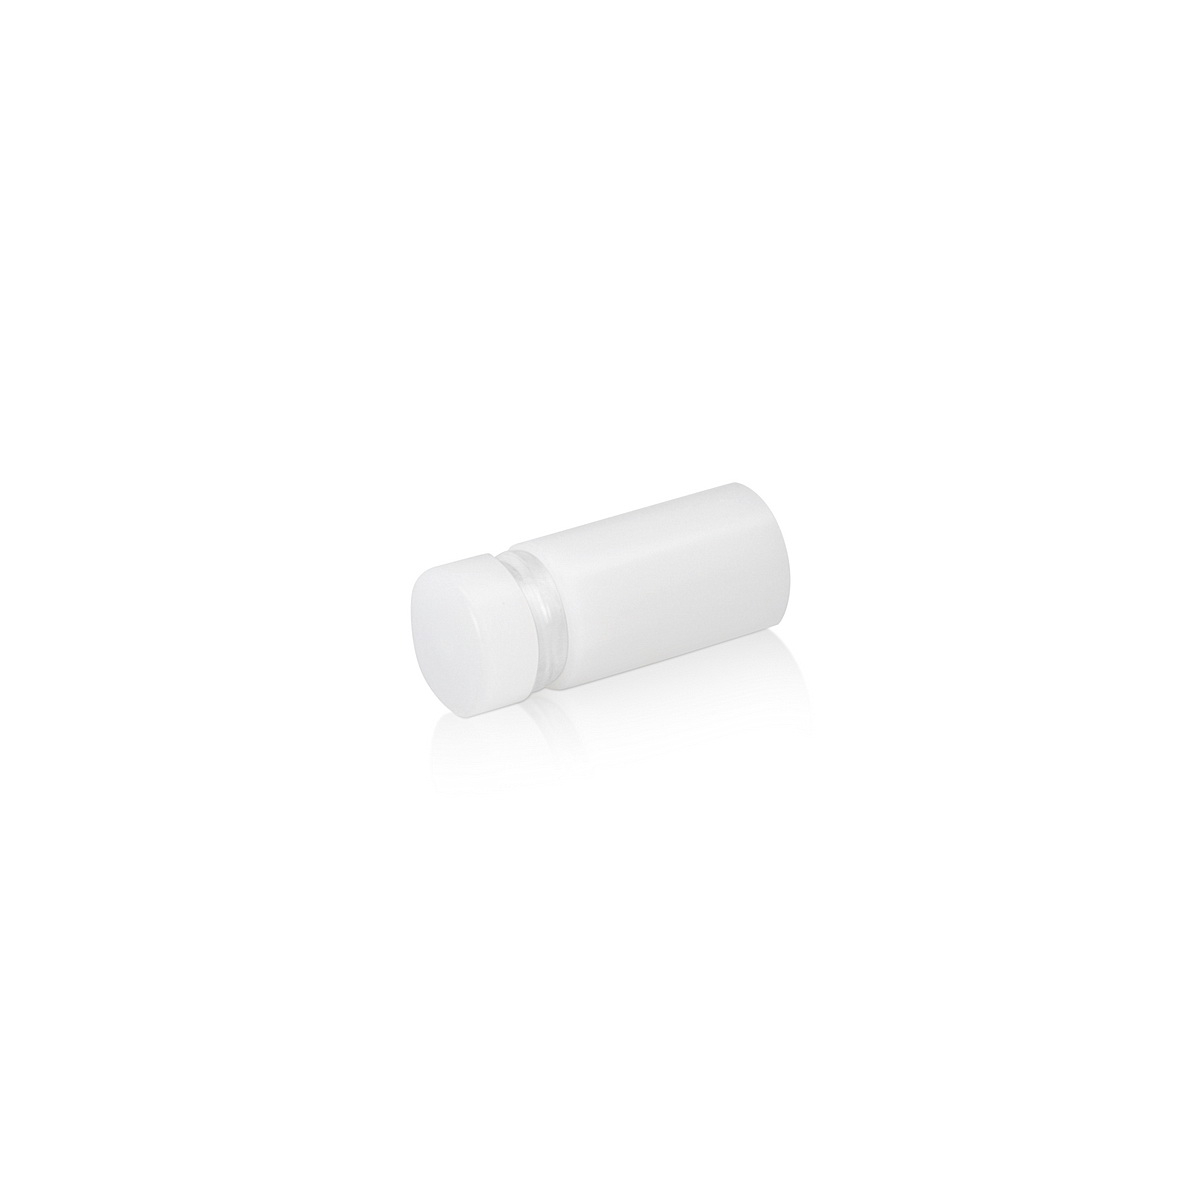 5/8'' Diameter X 1'' Barrel Length, White Acrylic Standoff. Easy Fasten Standoff (For Inside Use Only) Tamper Proof [Required Material Hole Size: 3/8'']